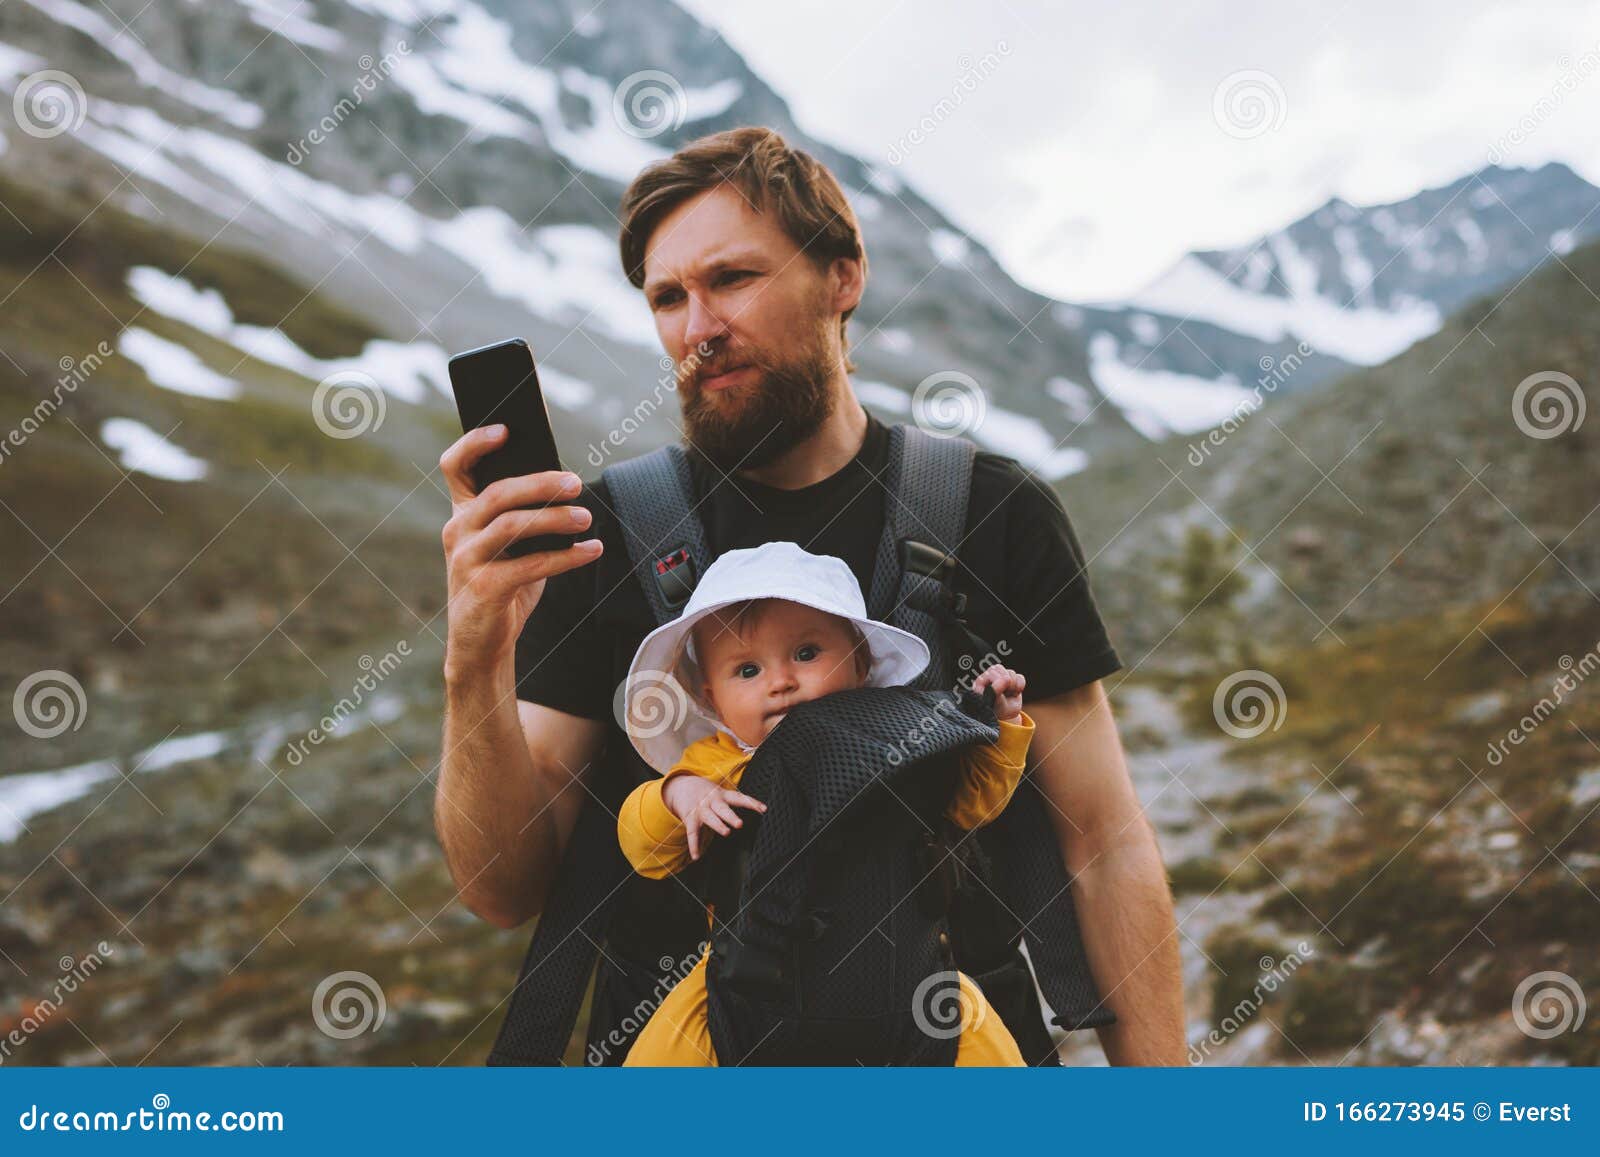 hiking baby carrier